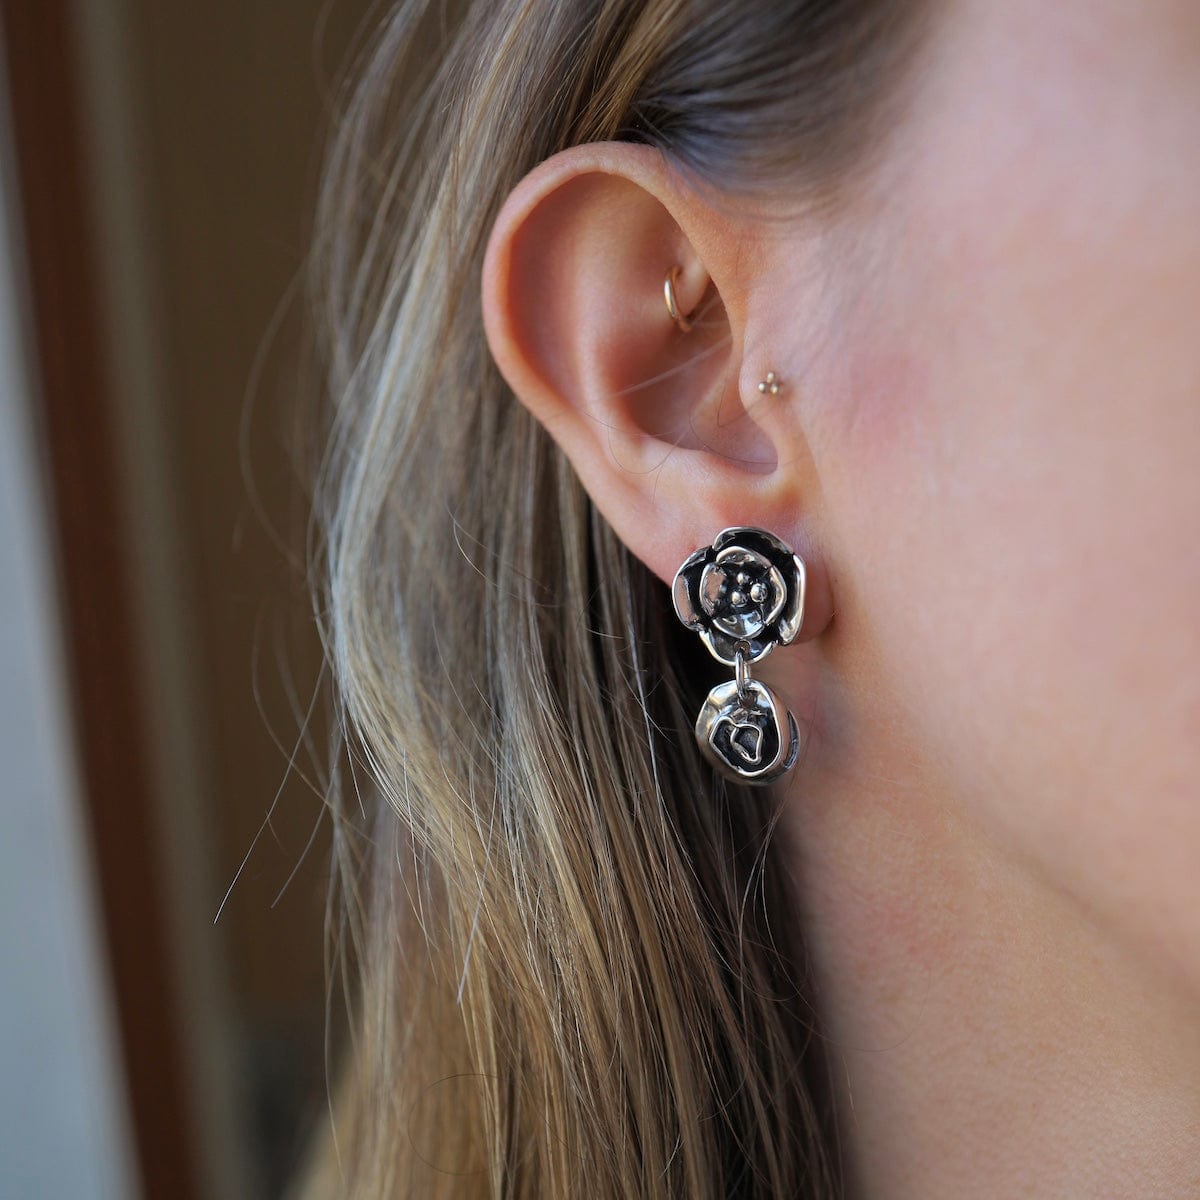 EAR Double Dogwood Post Earrings with Small Rose Drop